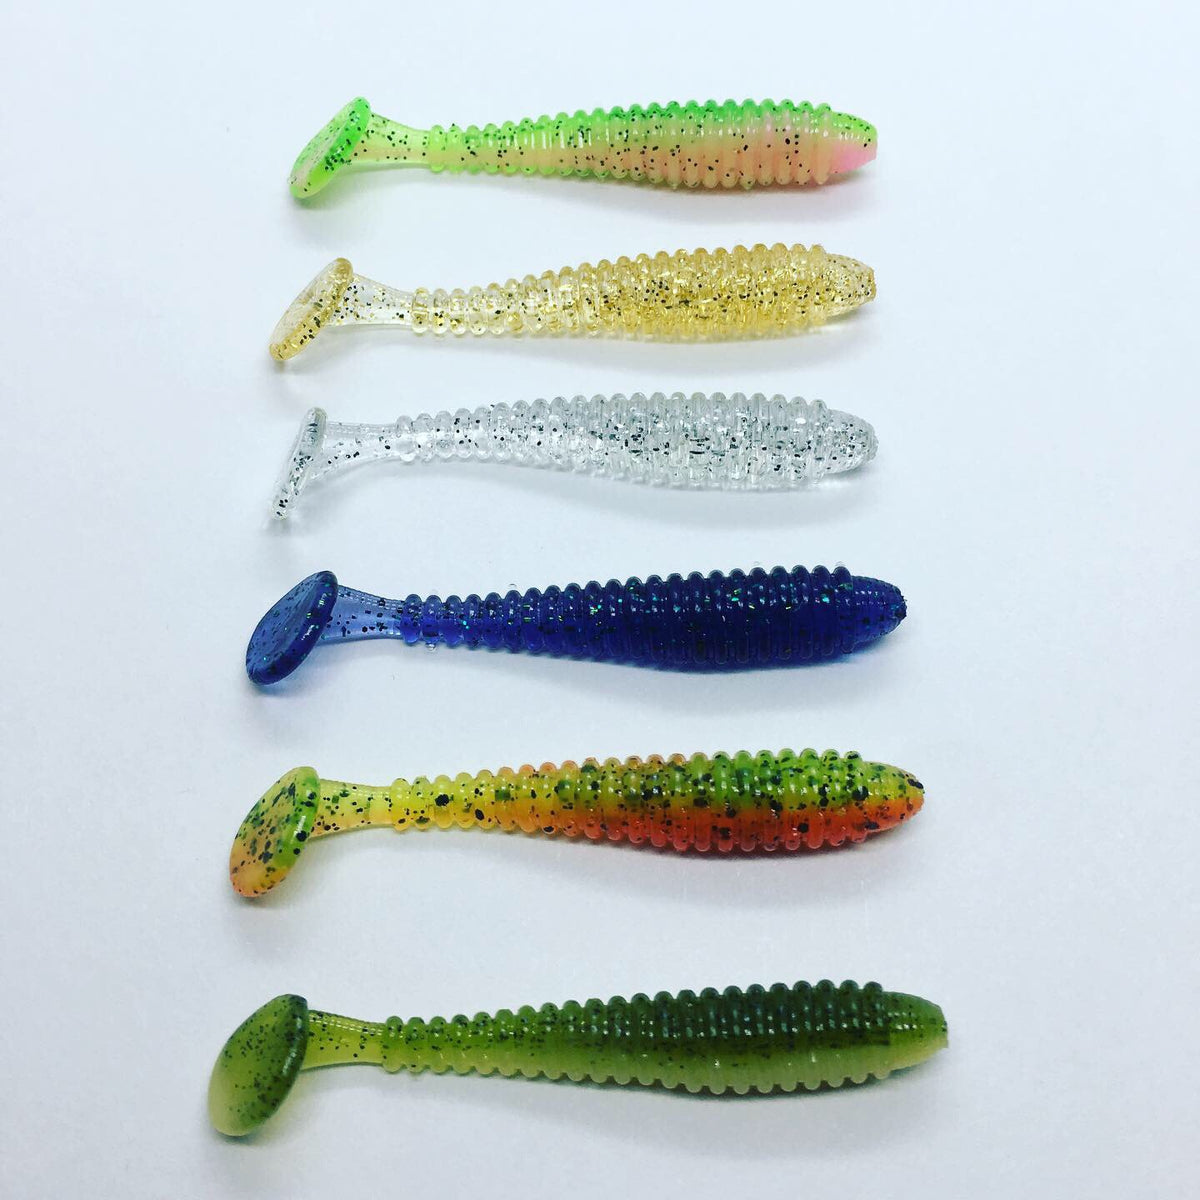 Micro Minnows – Peter's Custom Trout Worms